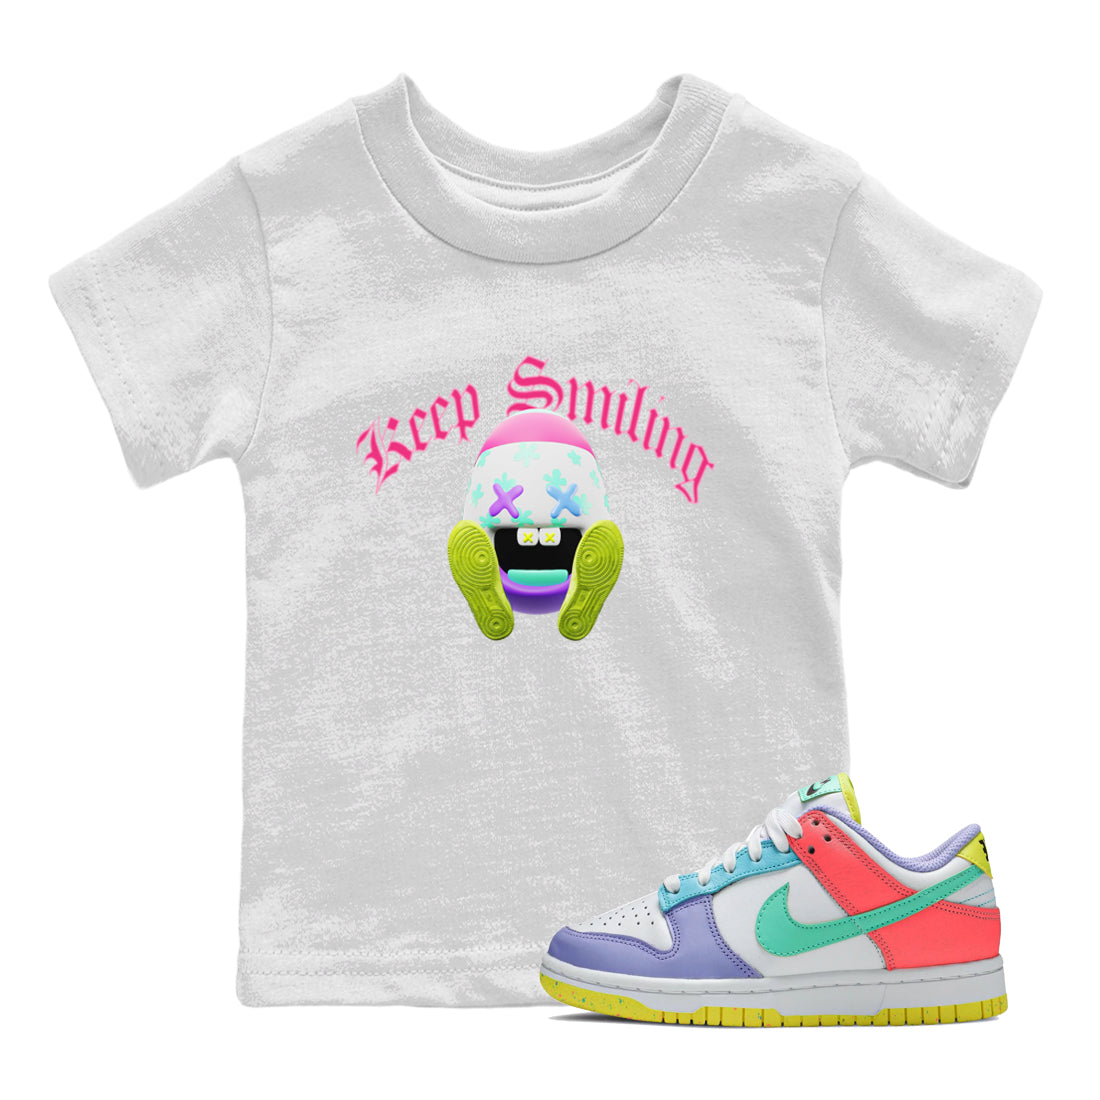 Dunk Easter Candy Sneaker Tees Drip Gear Zone Keep Smiling Sneaker Tees Nike Easter Shirt Kids Shirts White 1